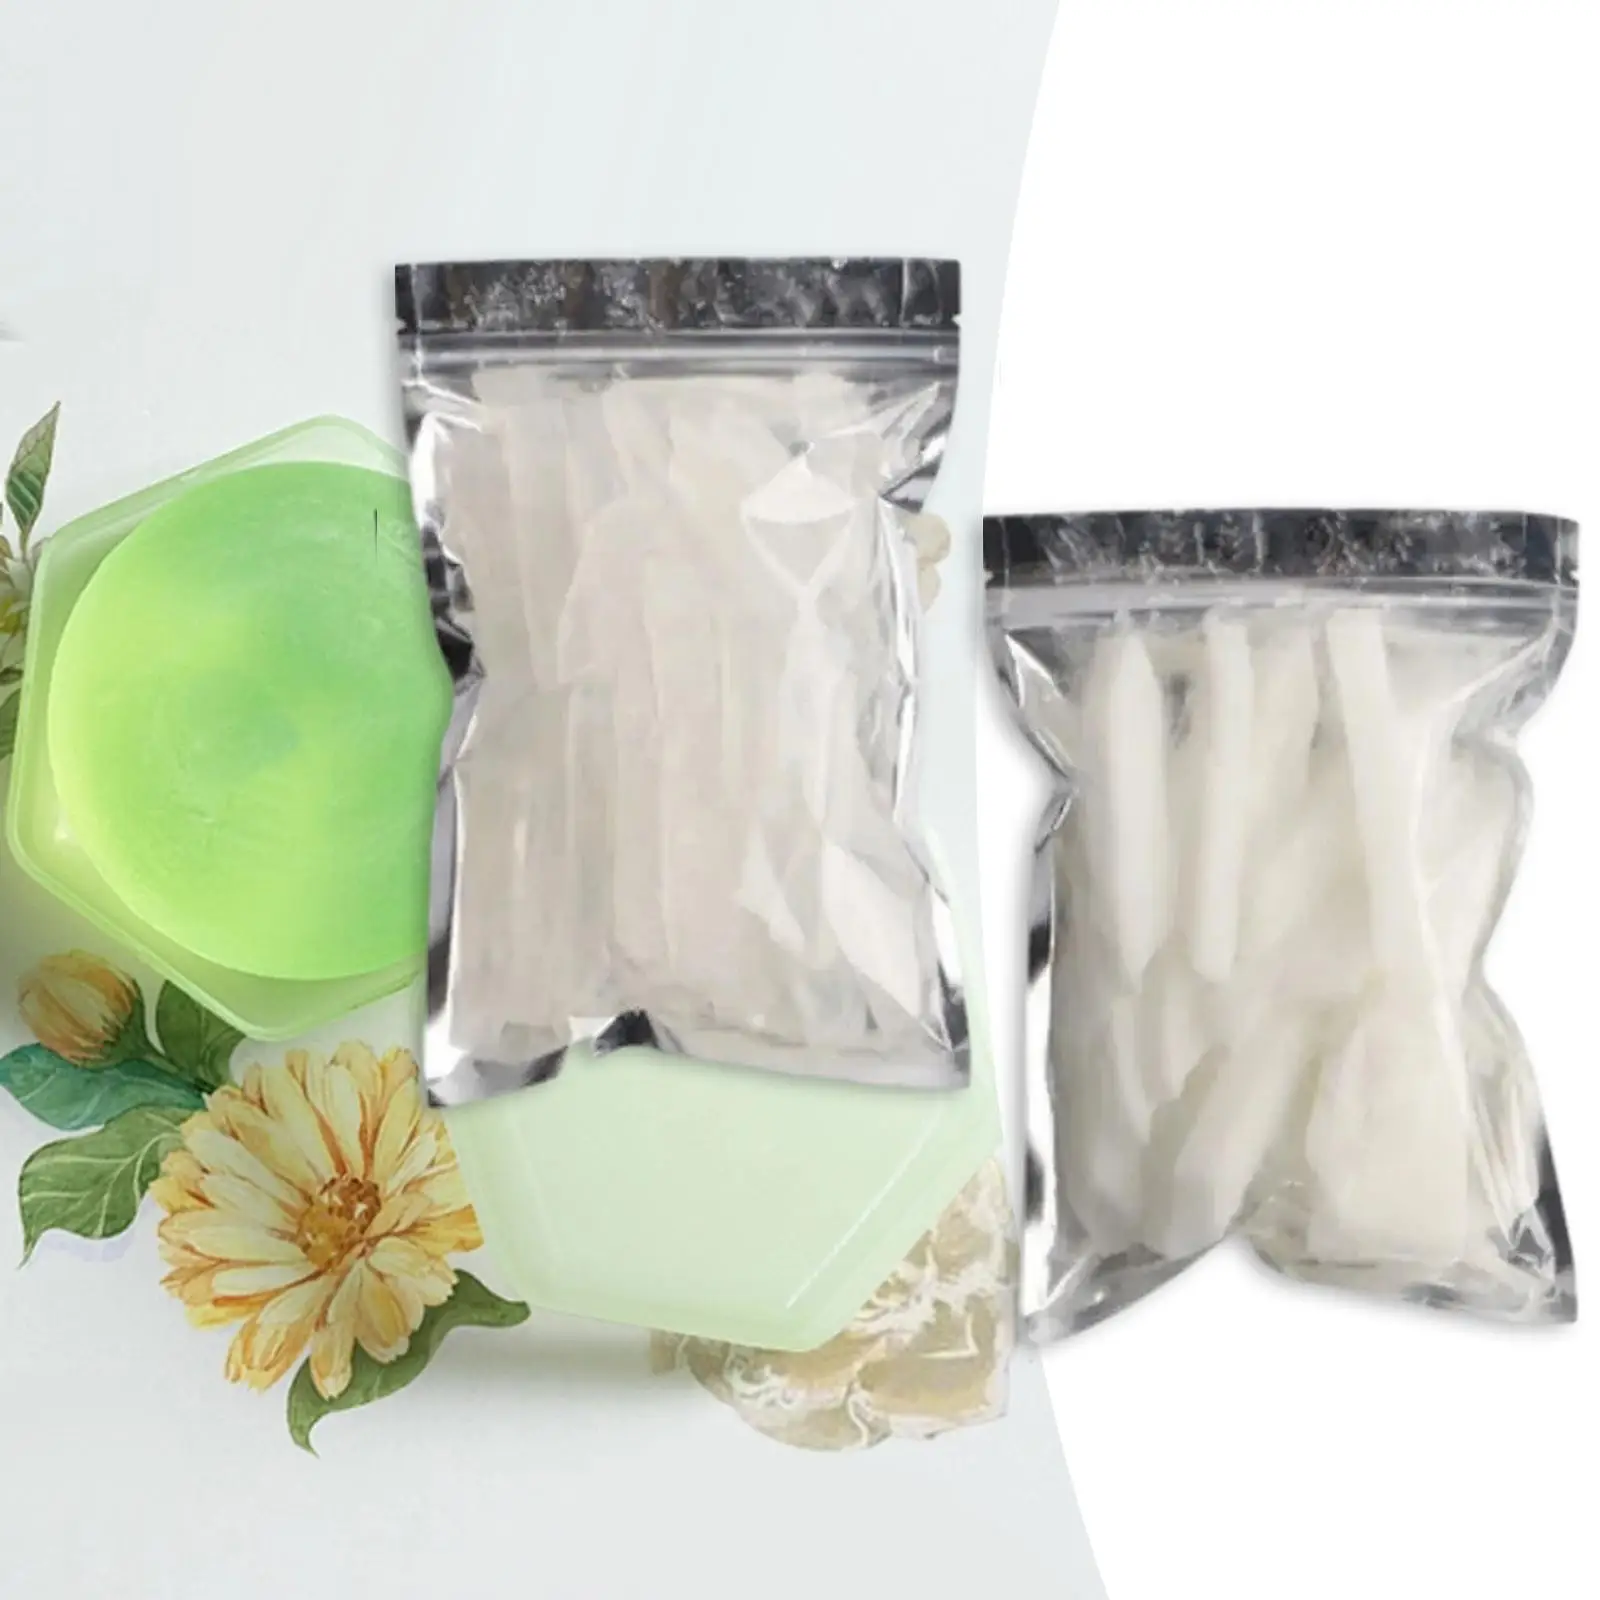 Soap Base Transparent and White 500G Easy to Make Melt and Pour Soap DIY Supplies Soap Crafting Handmade Soap Material Men Women